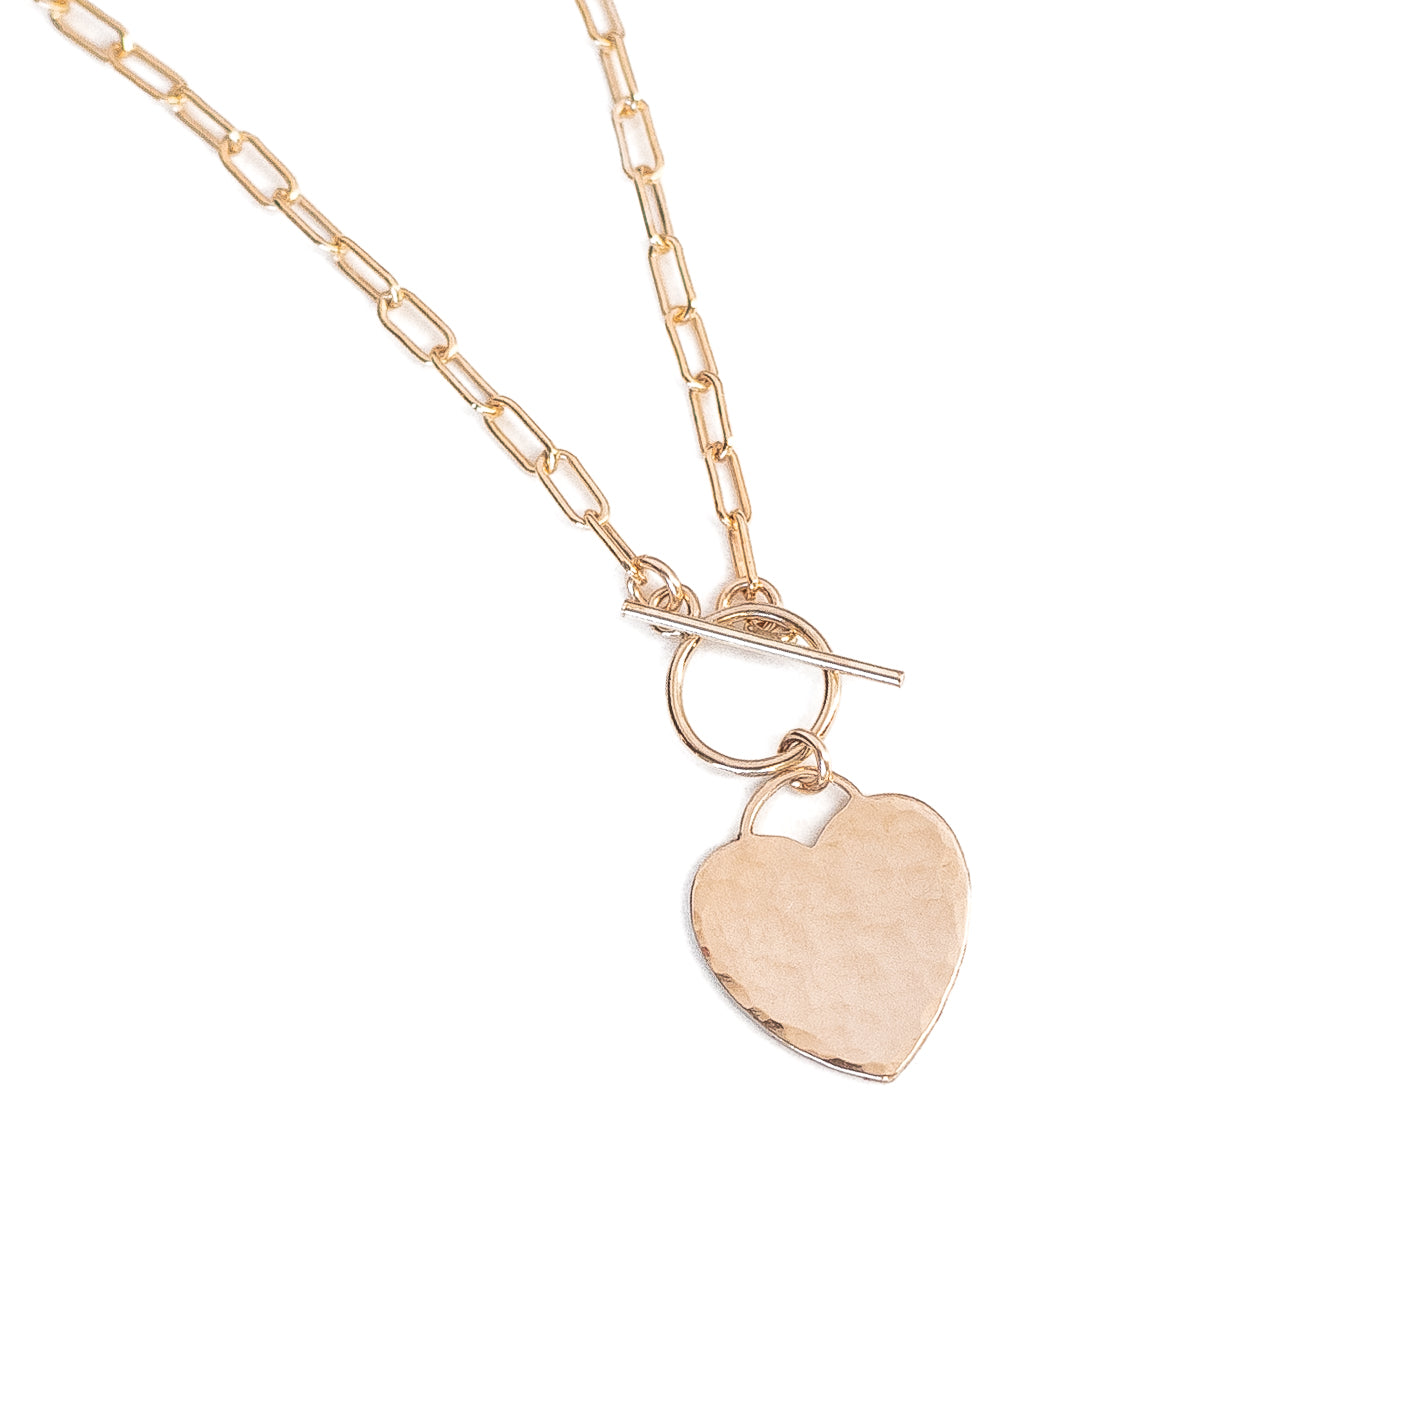 Hammered Heart Toggle Necklace